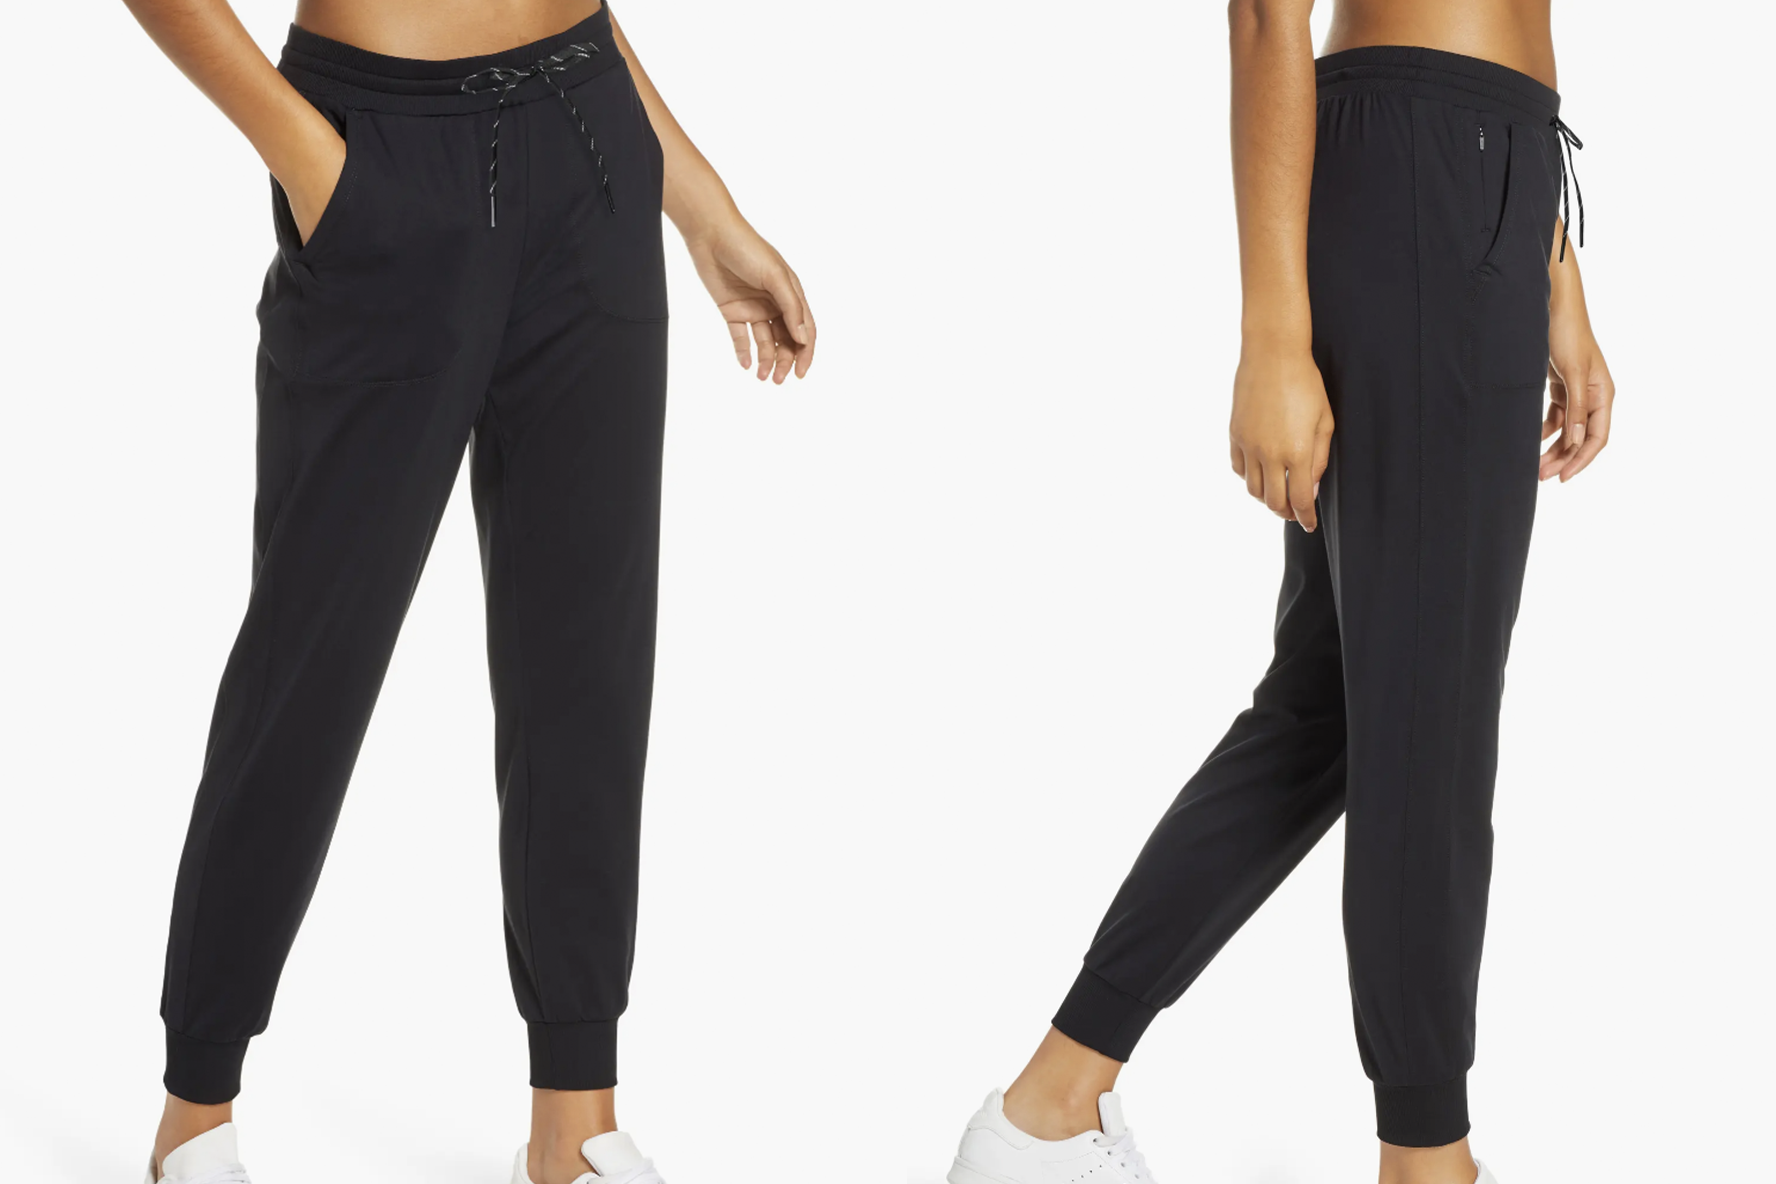 Zella vs Lululemon – Are They Really Just As Good As Each Other?